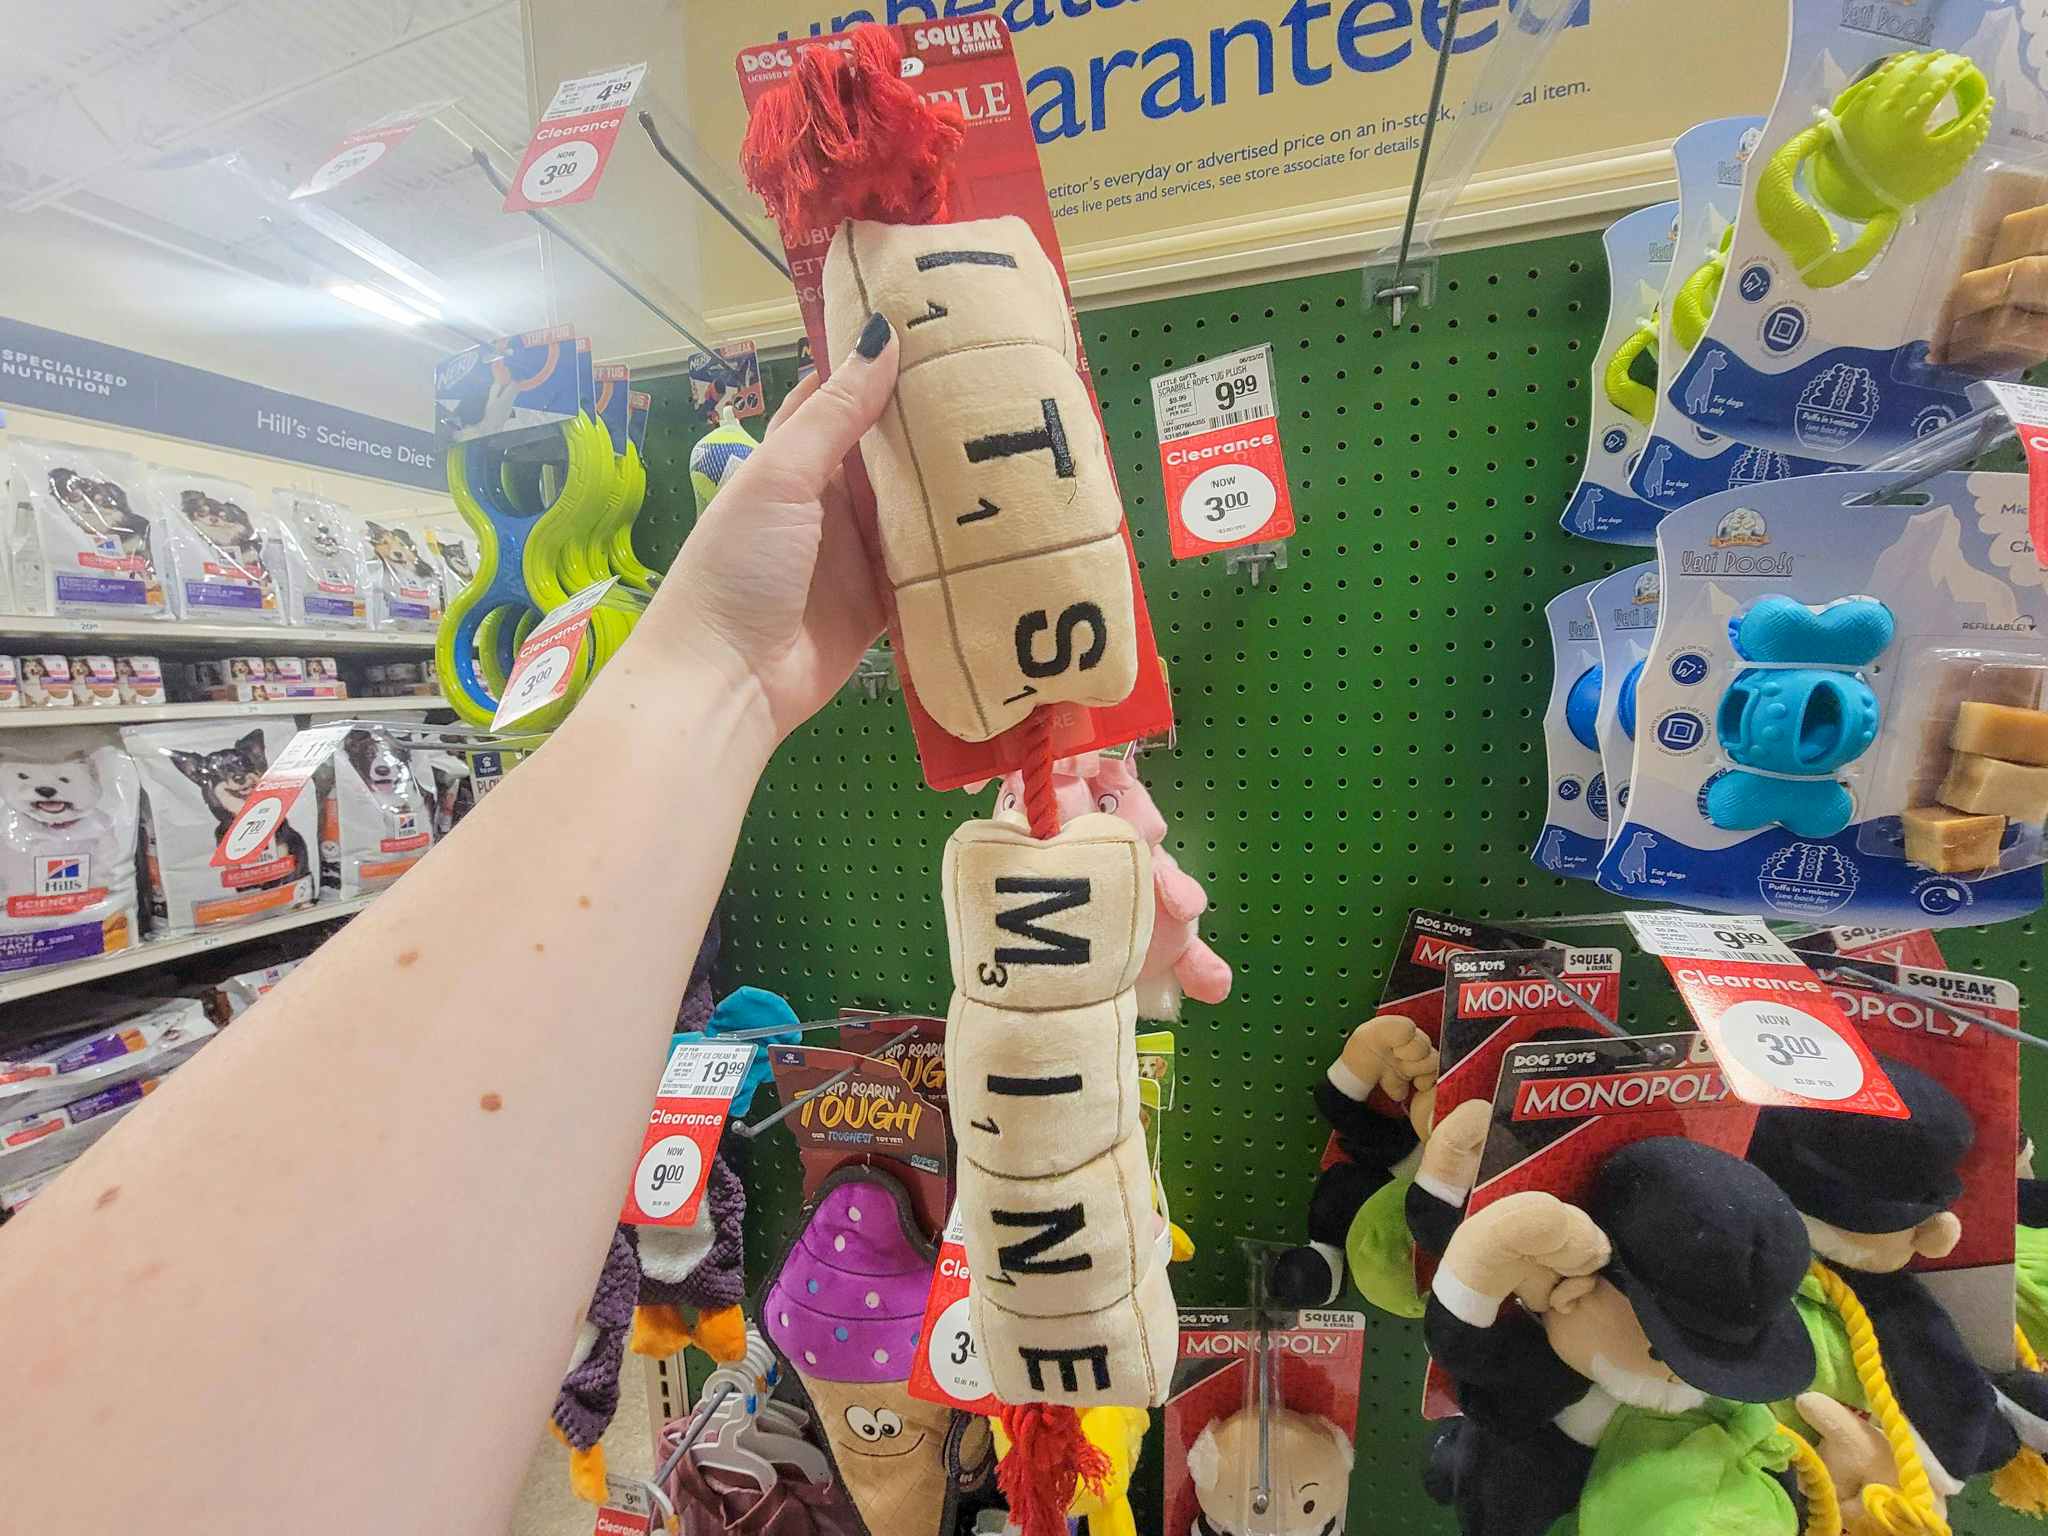 hand holding a scrabble tile dog toy